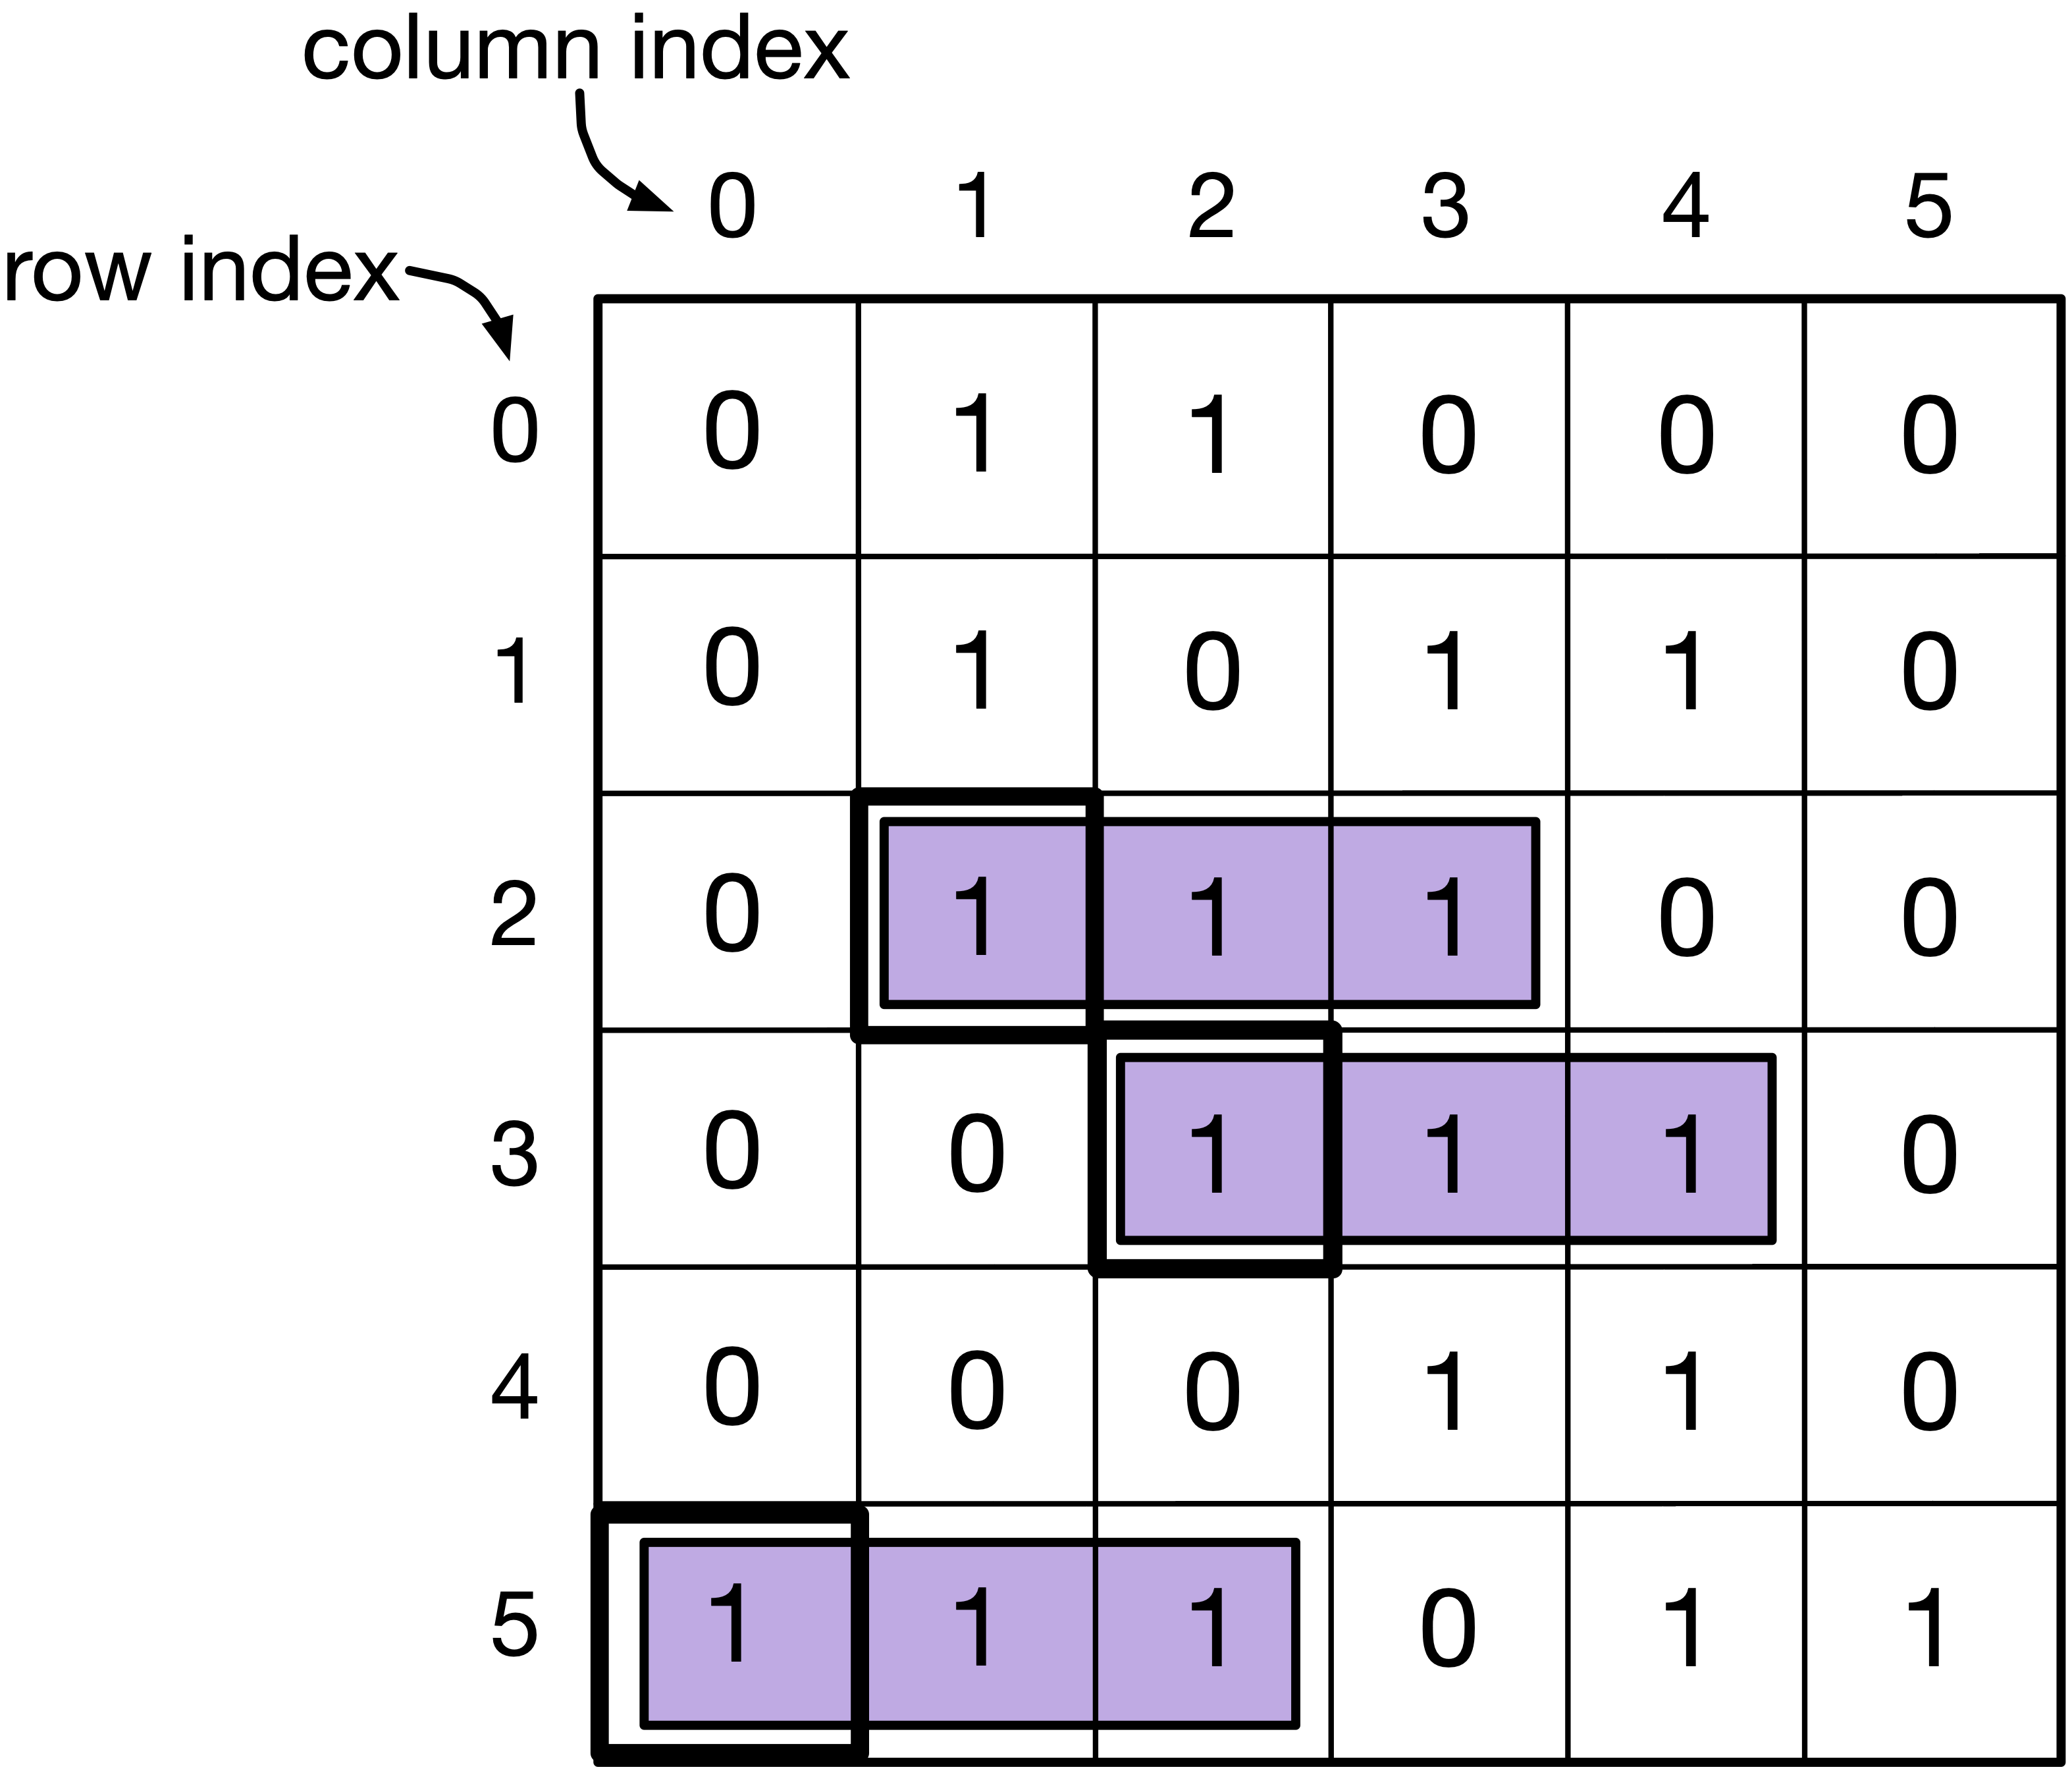 6 by 6 array with 0s and 1s